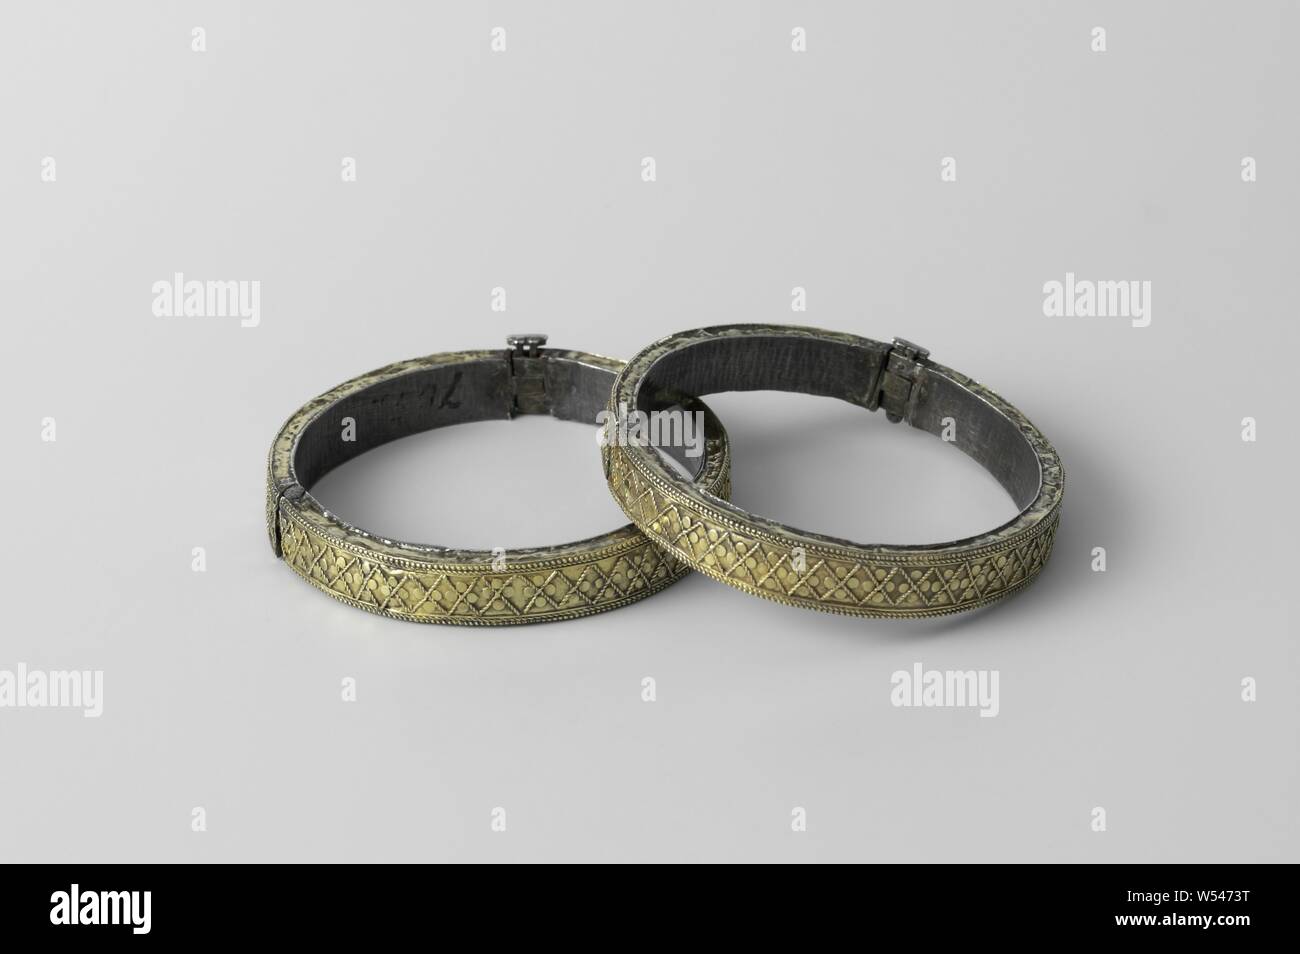 Pair of bracelets (chandan churi), Bracelet (chandan churi) with hinge and lock, silver plated with gold. Decorated with diamond motifs, small circles and four pearl borders., anonymous, Surat, c. 1750, gold (metal), silver (metal), striking (metalworking), d 6.5 cm × h 1.5 cm Stock Photo